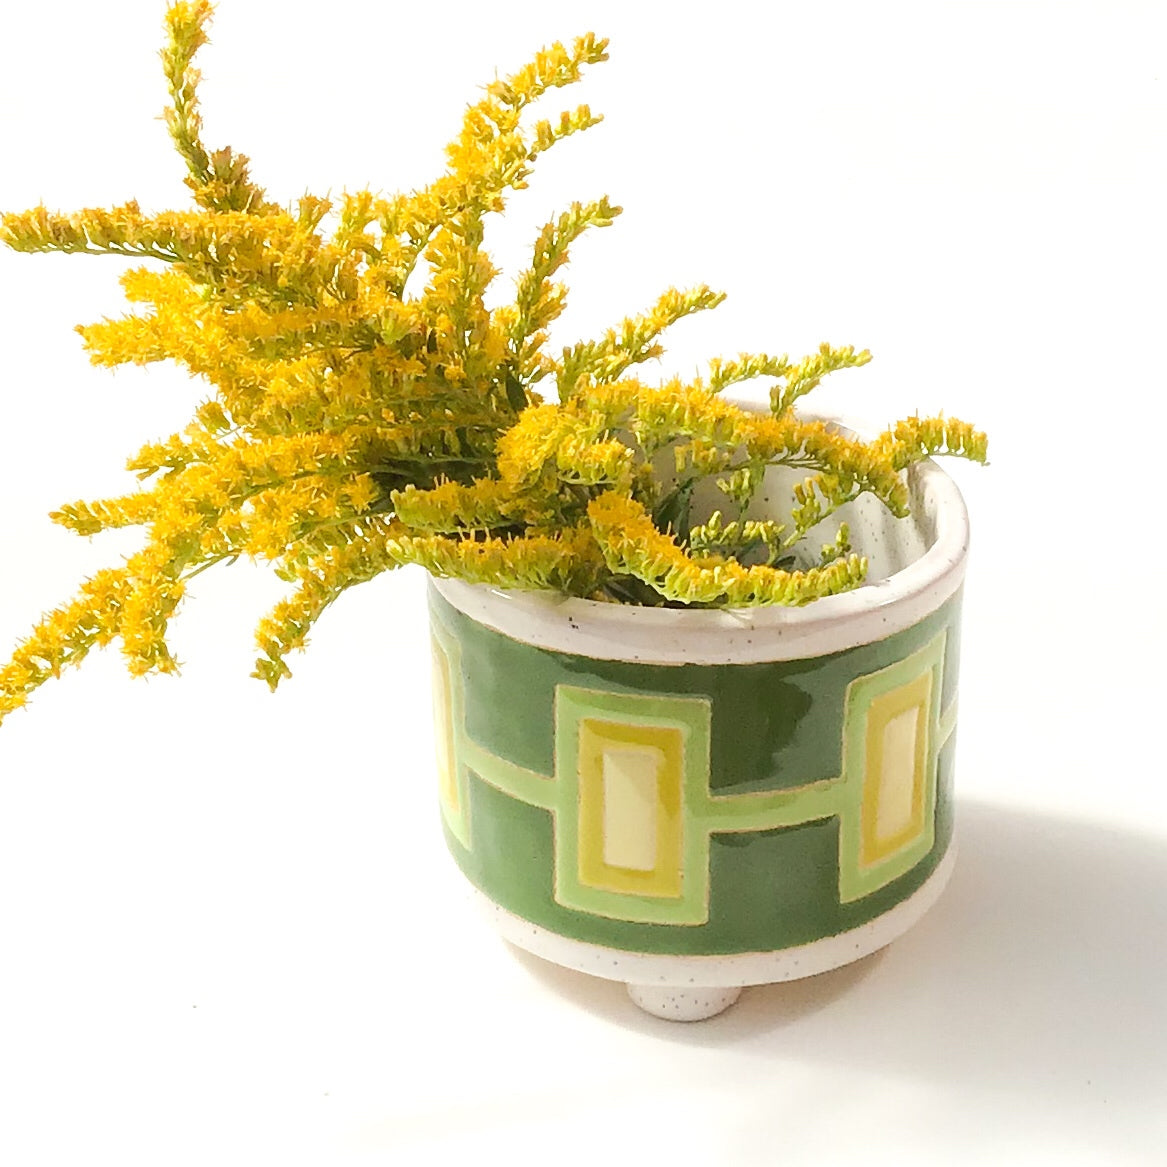 Handcrafted Ceramic Planter - Quilted Pattern in Vivid Greens over Speckled White Glaze